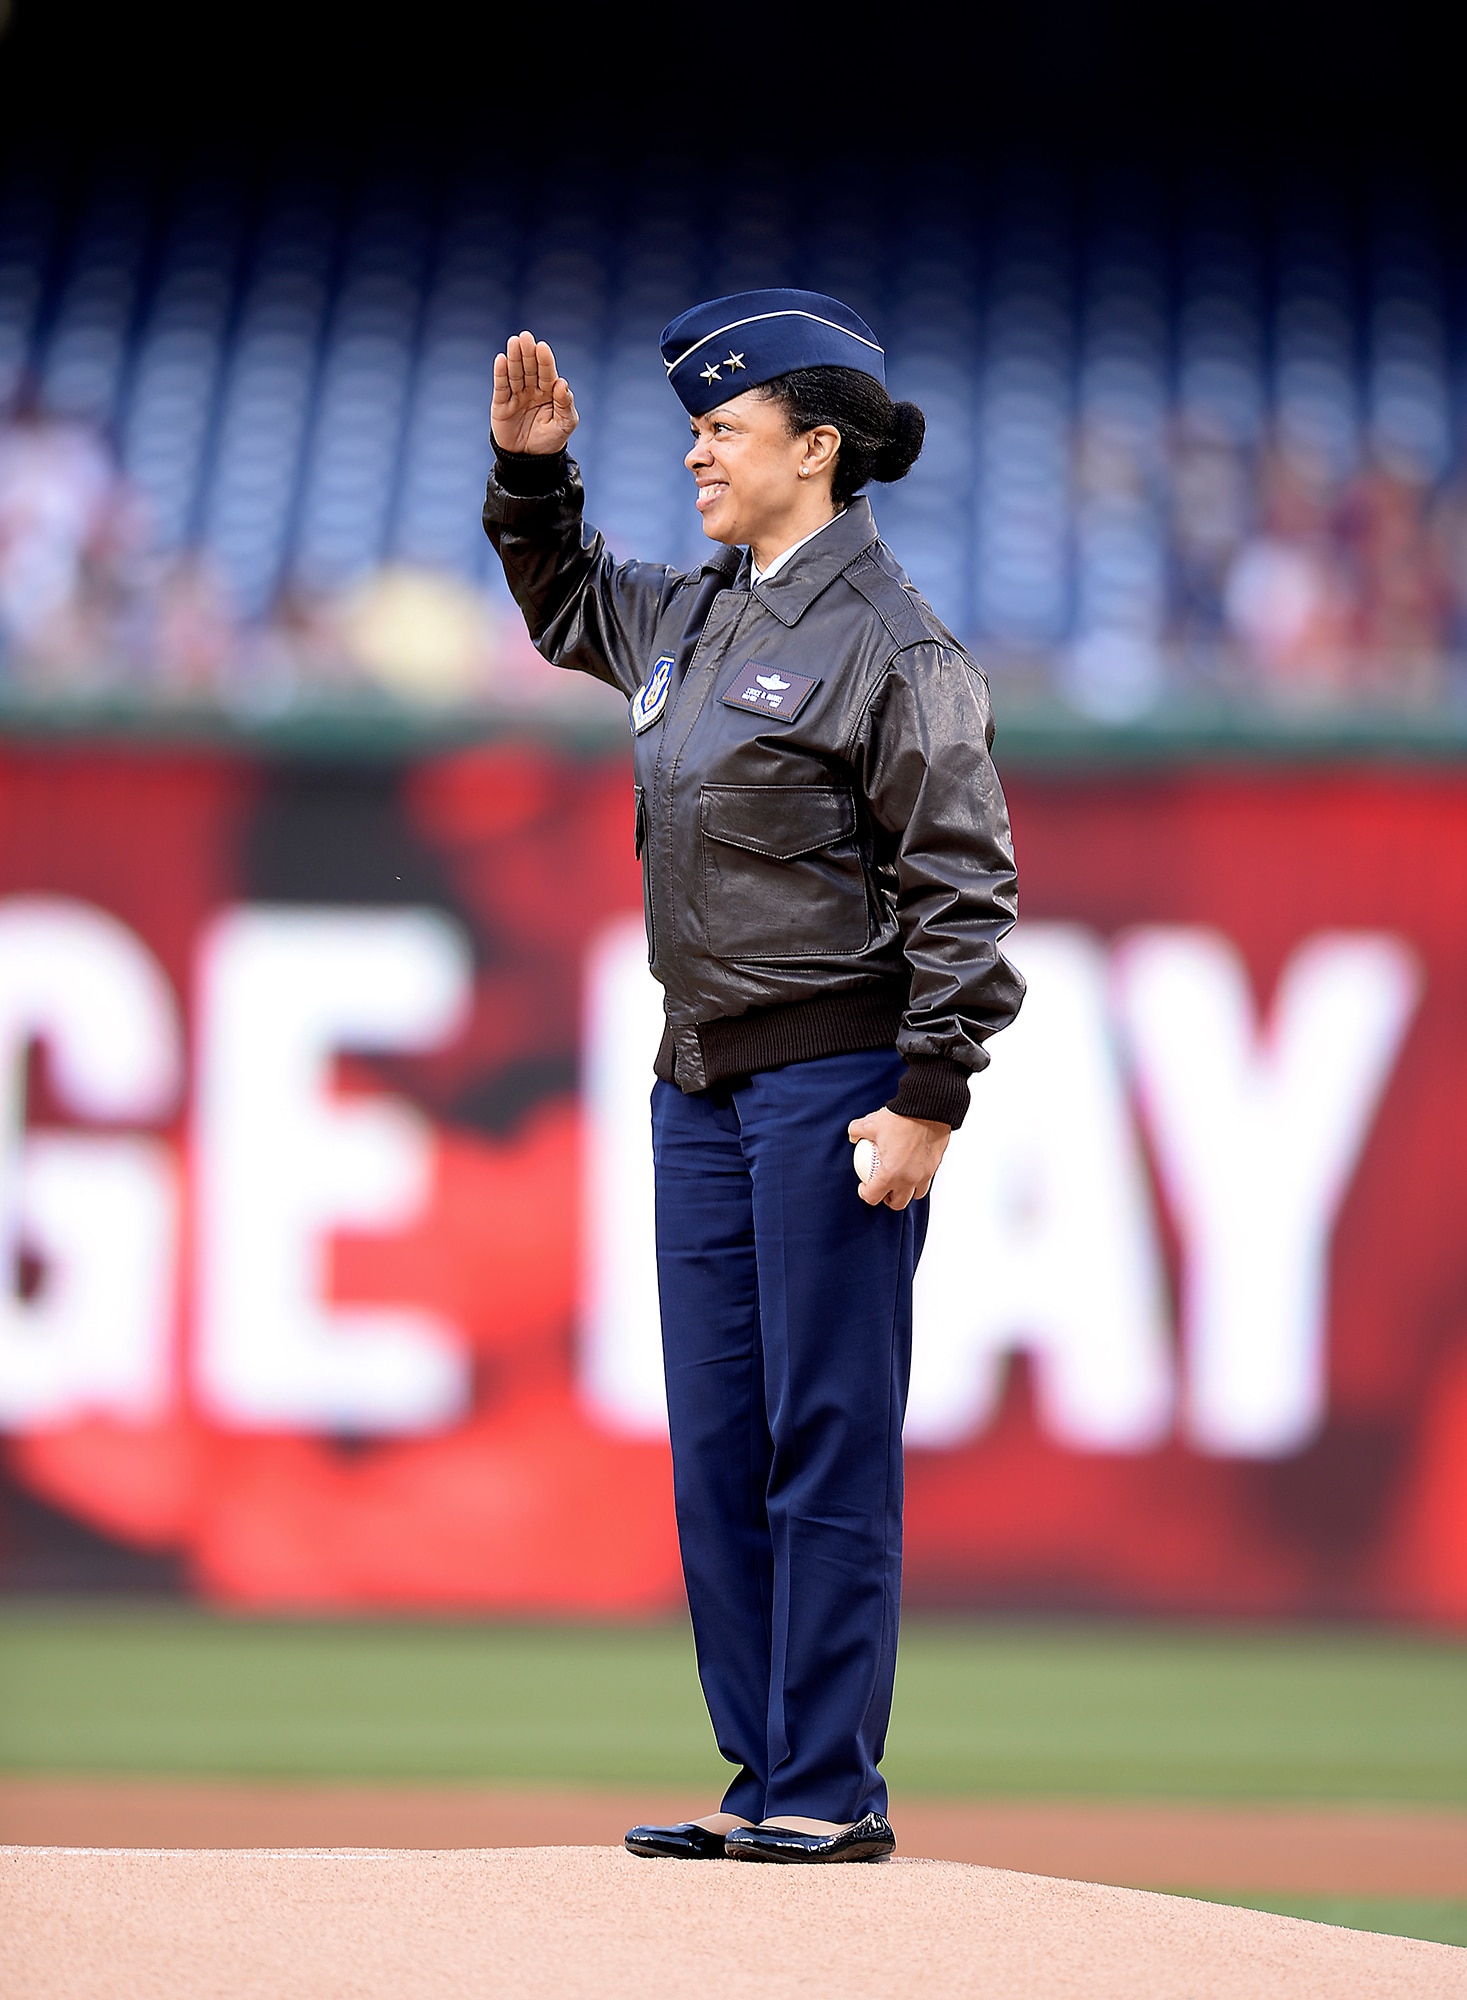 Maj. Gen. Stayce D. Harris, the commander of the 22nd Air Force, Air Force Reserve Command, presented the game ball to the pitcher before the Washington Nationals vs. Philadelphia Phillies game in Washington, April 17, 2015.  Harris, the highest-ranking black female officer in the Air Force, is presenting in honor of black heritage day at Nationals Park Stadium.  She also represented the Air Force Reserve for its 67th birthday.  (U.S. Air Force photo/Scott M. Ash)